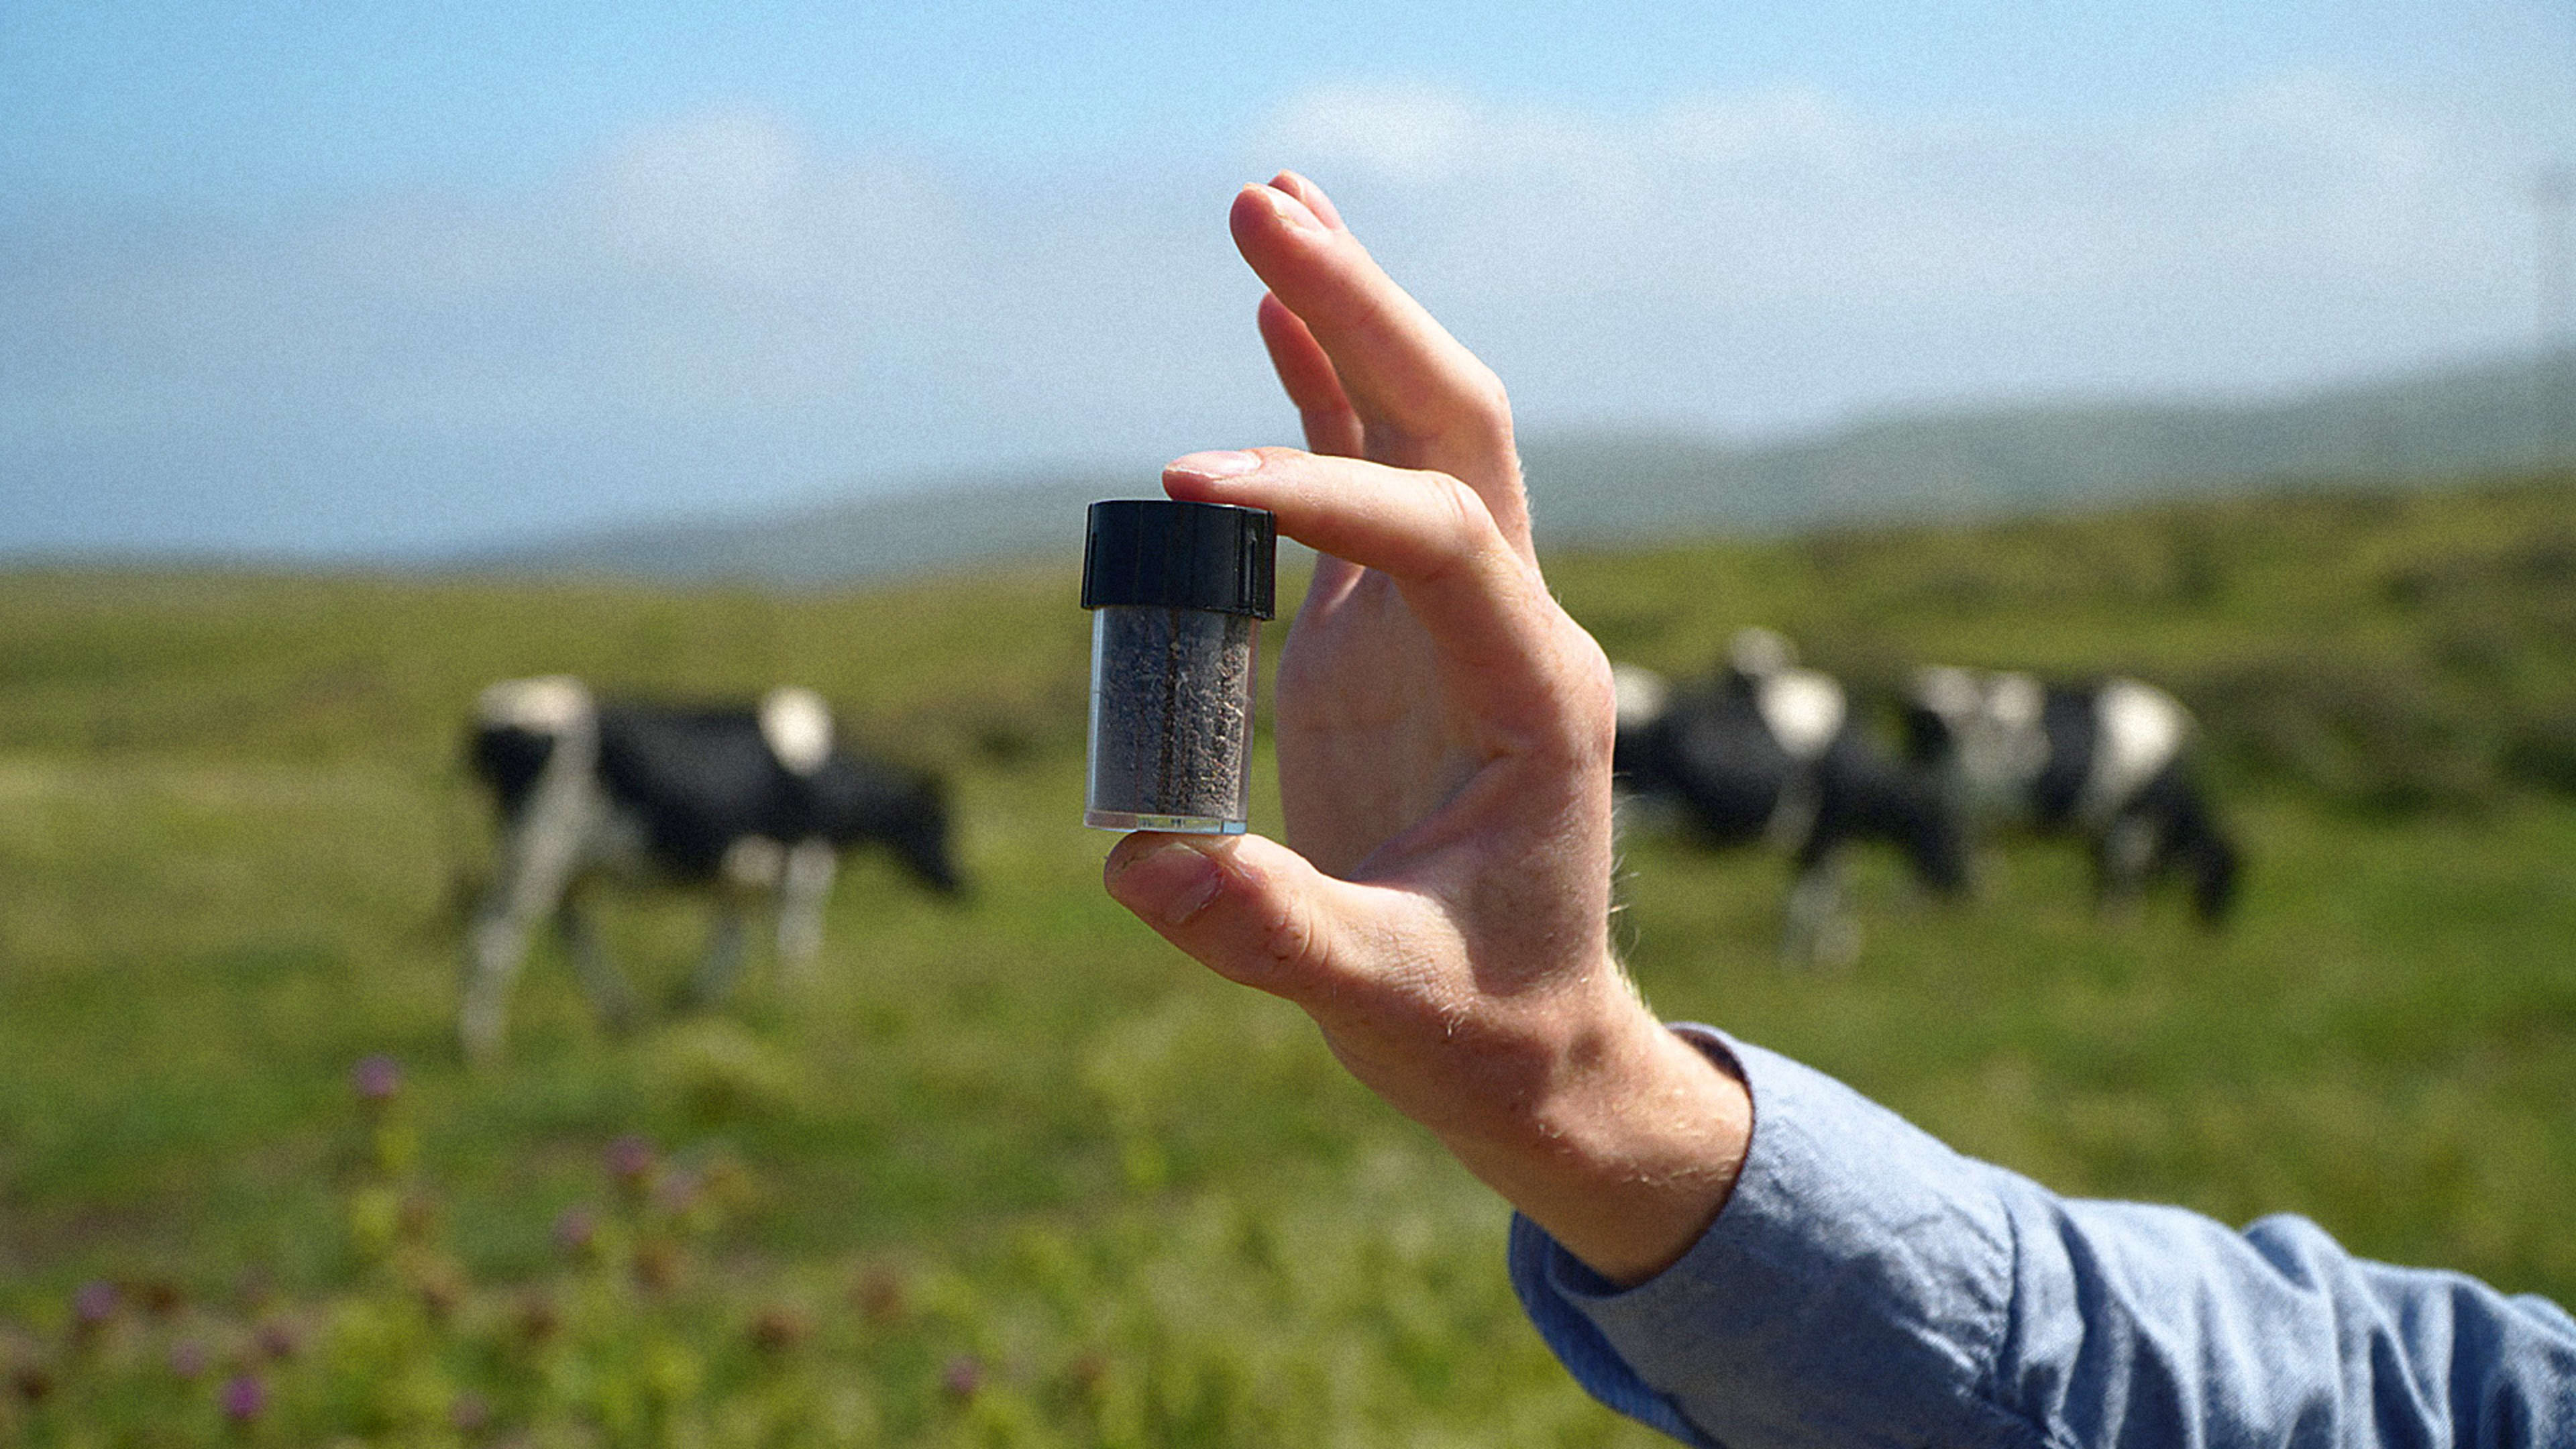 This factory is growing a new kind of food for cows: A seaweed that reduces their burps